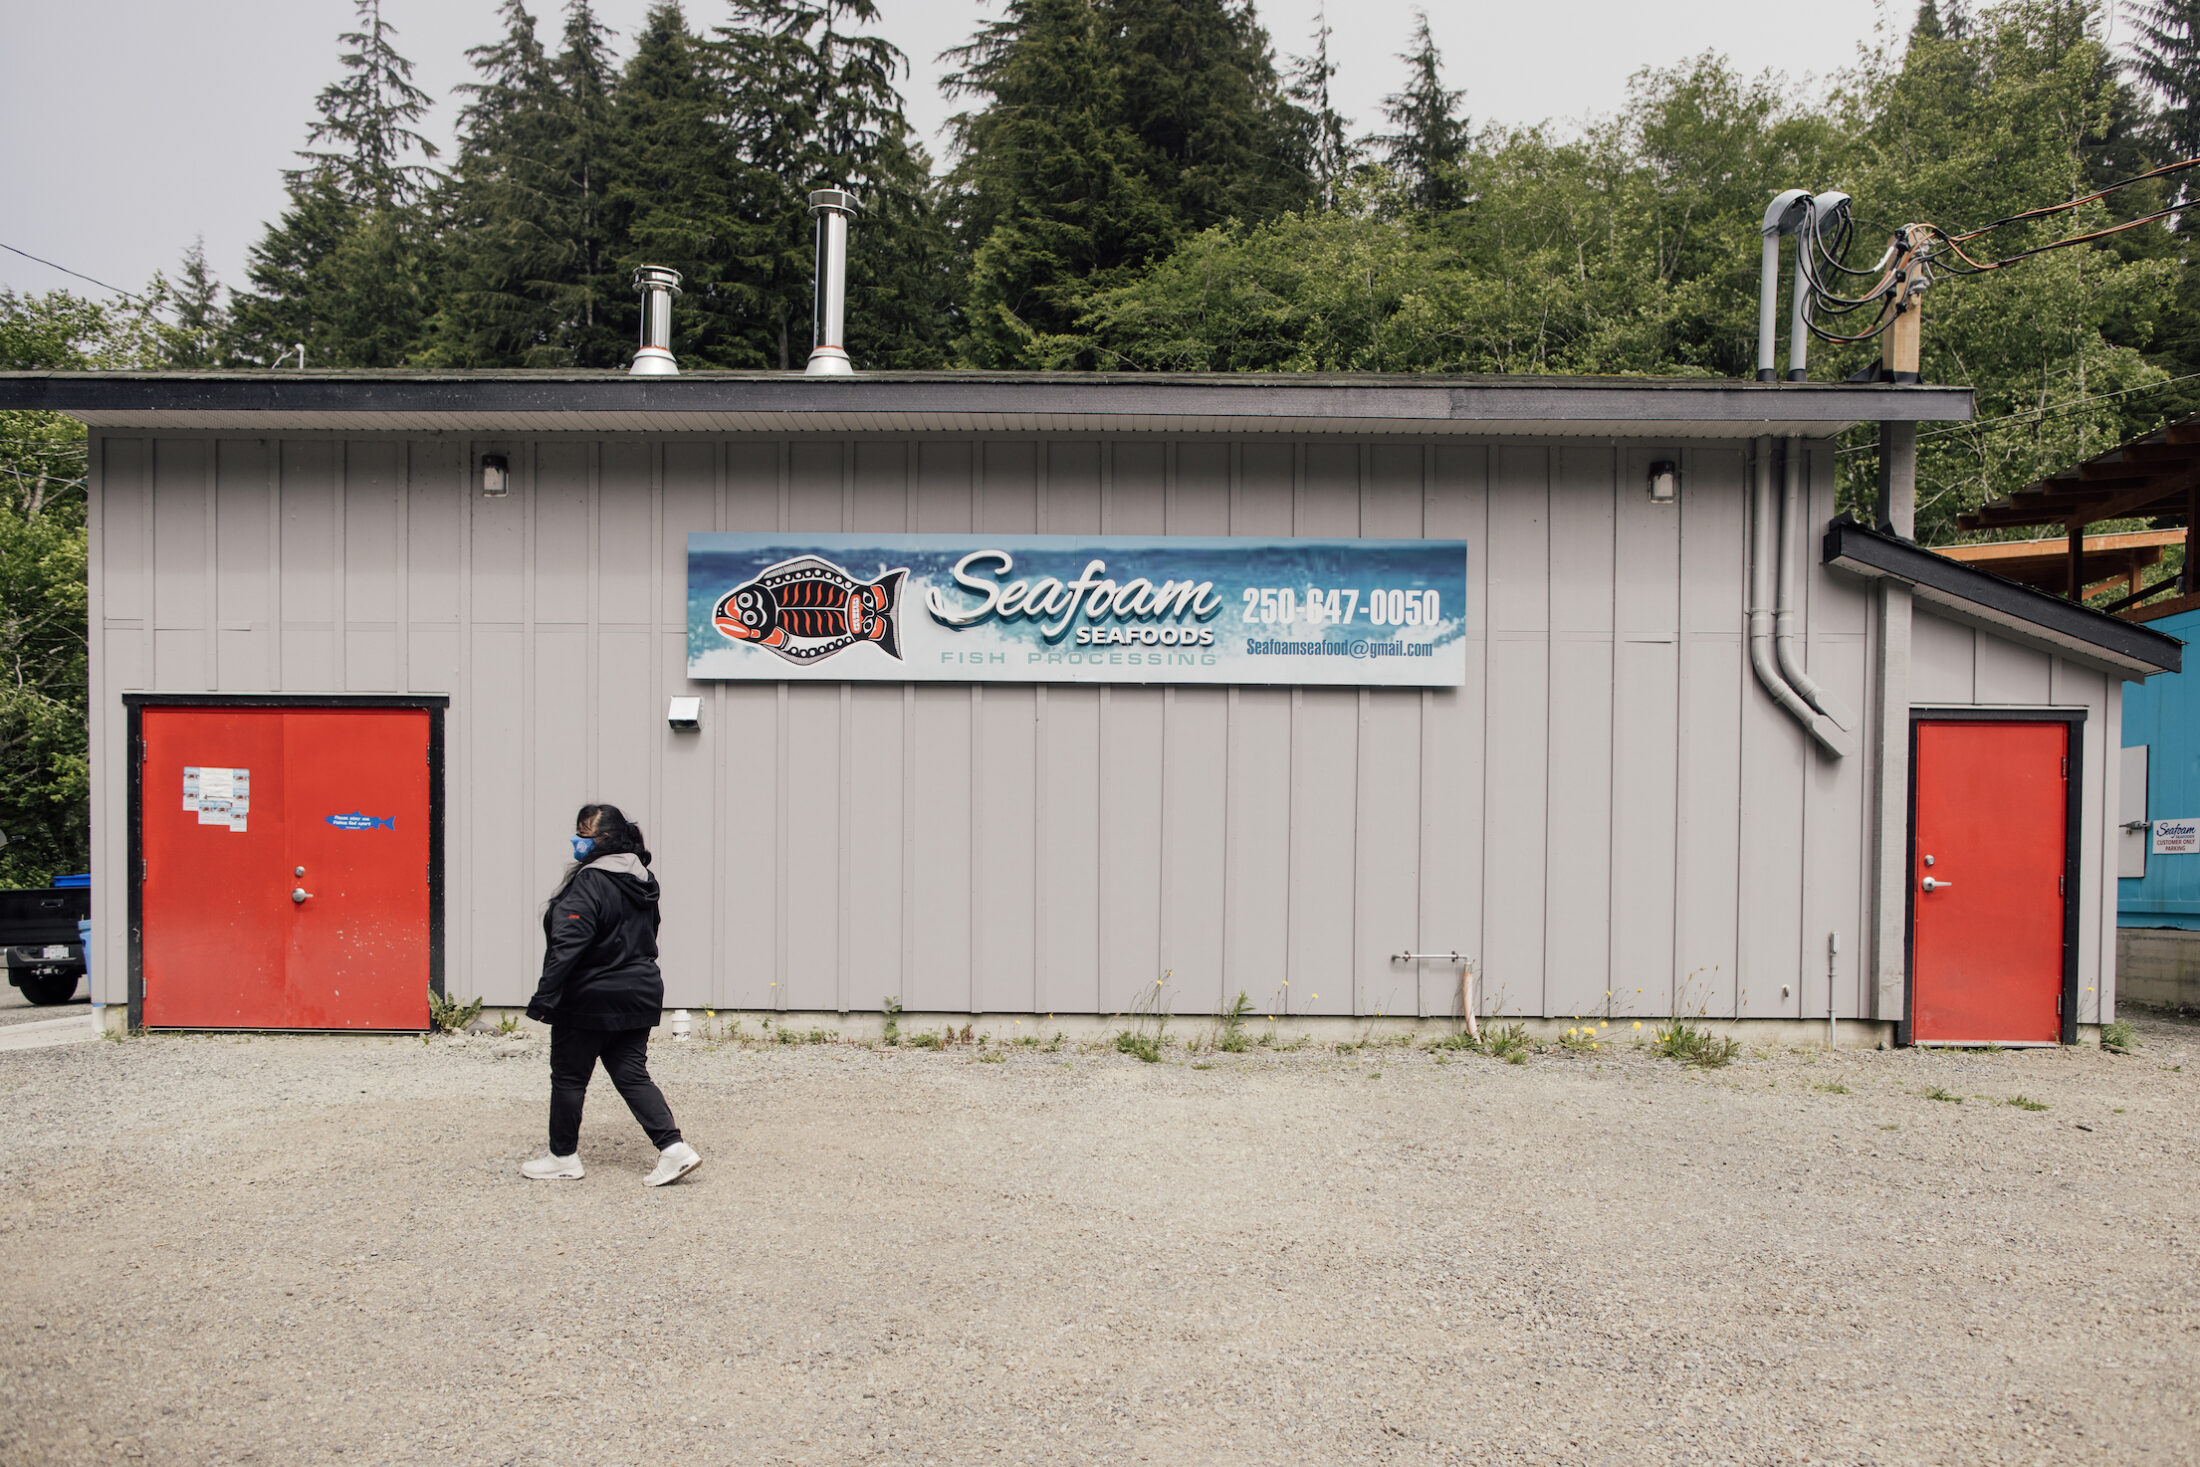 Diane Pointe is the manager of Seafoam Seafoods a Pacheedaht owned and run fish processing plant